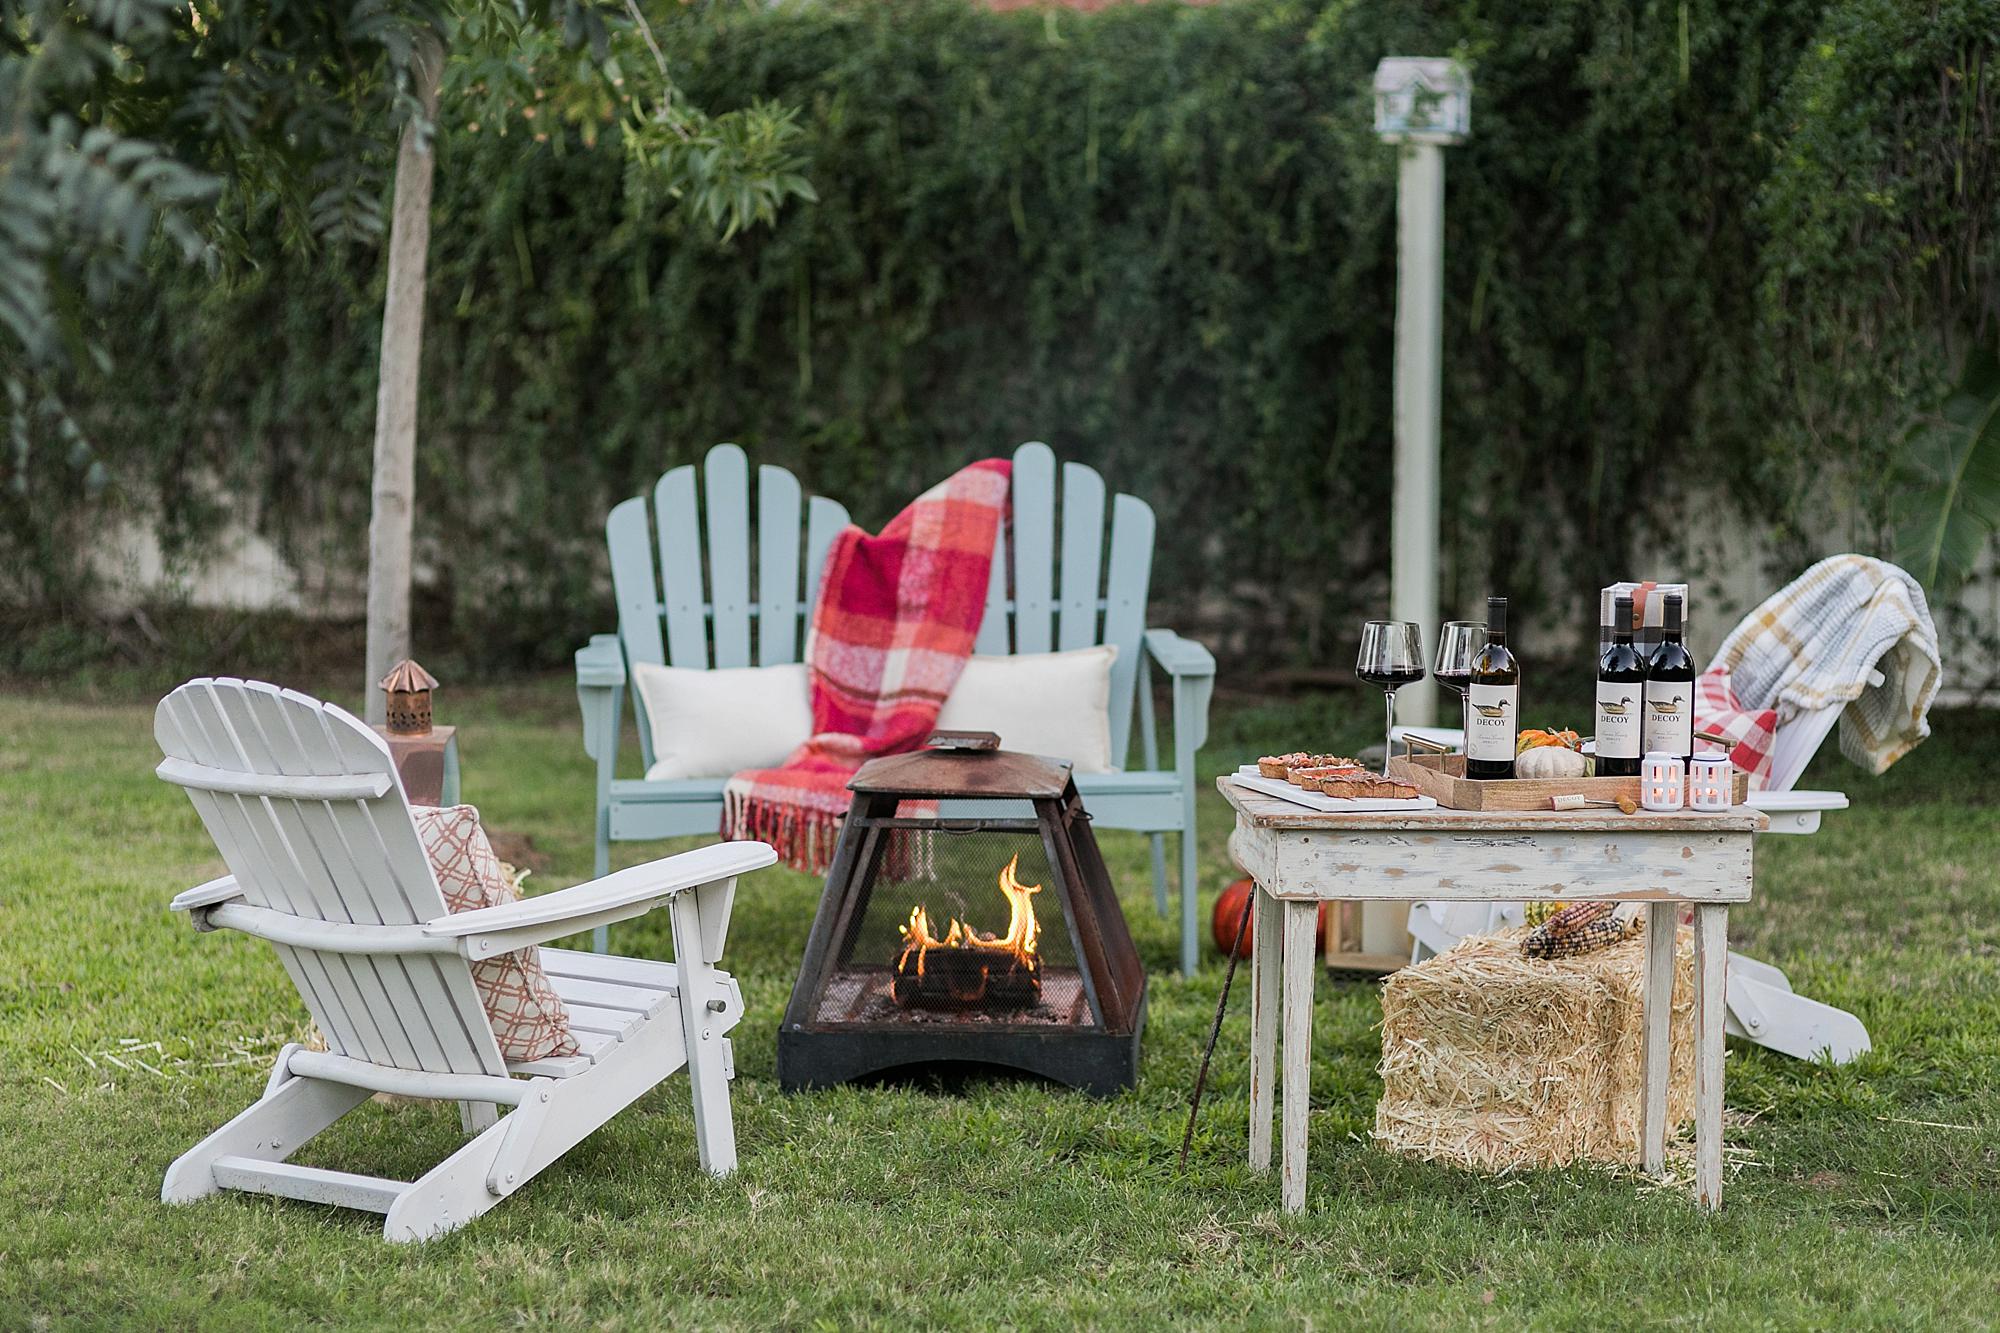 fall backyard gathering party outdoors with decoy wine merlot for October merlot month #wineparty #wine